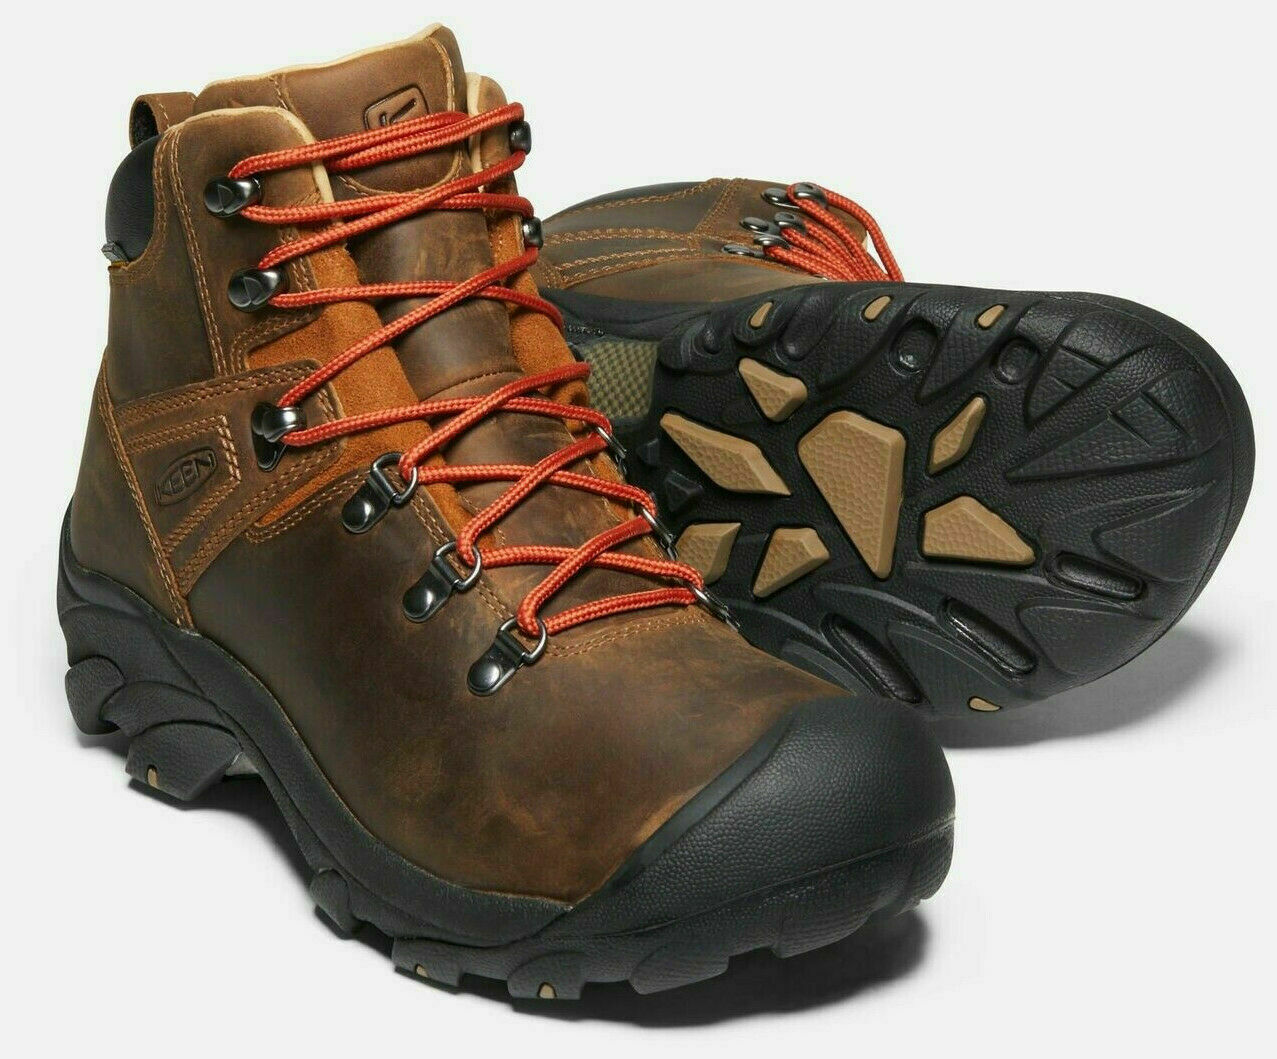 KEEN Men's Pyrenees Waterproof Hiking Boots Syrup Size 10 Medium Width NEW!